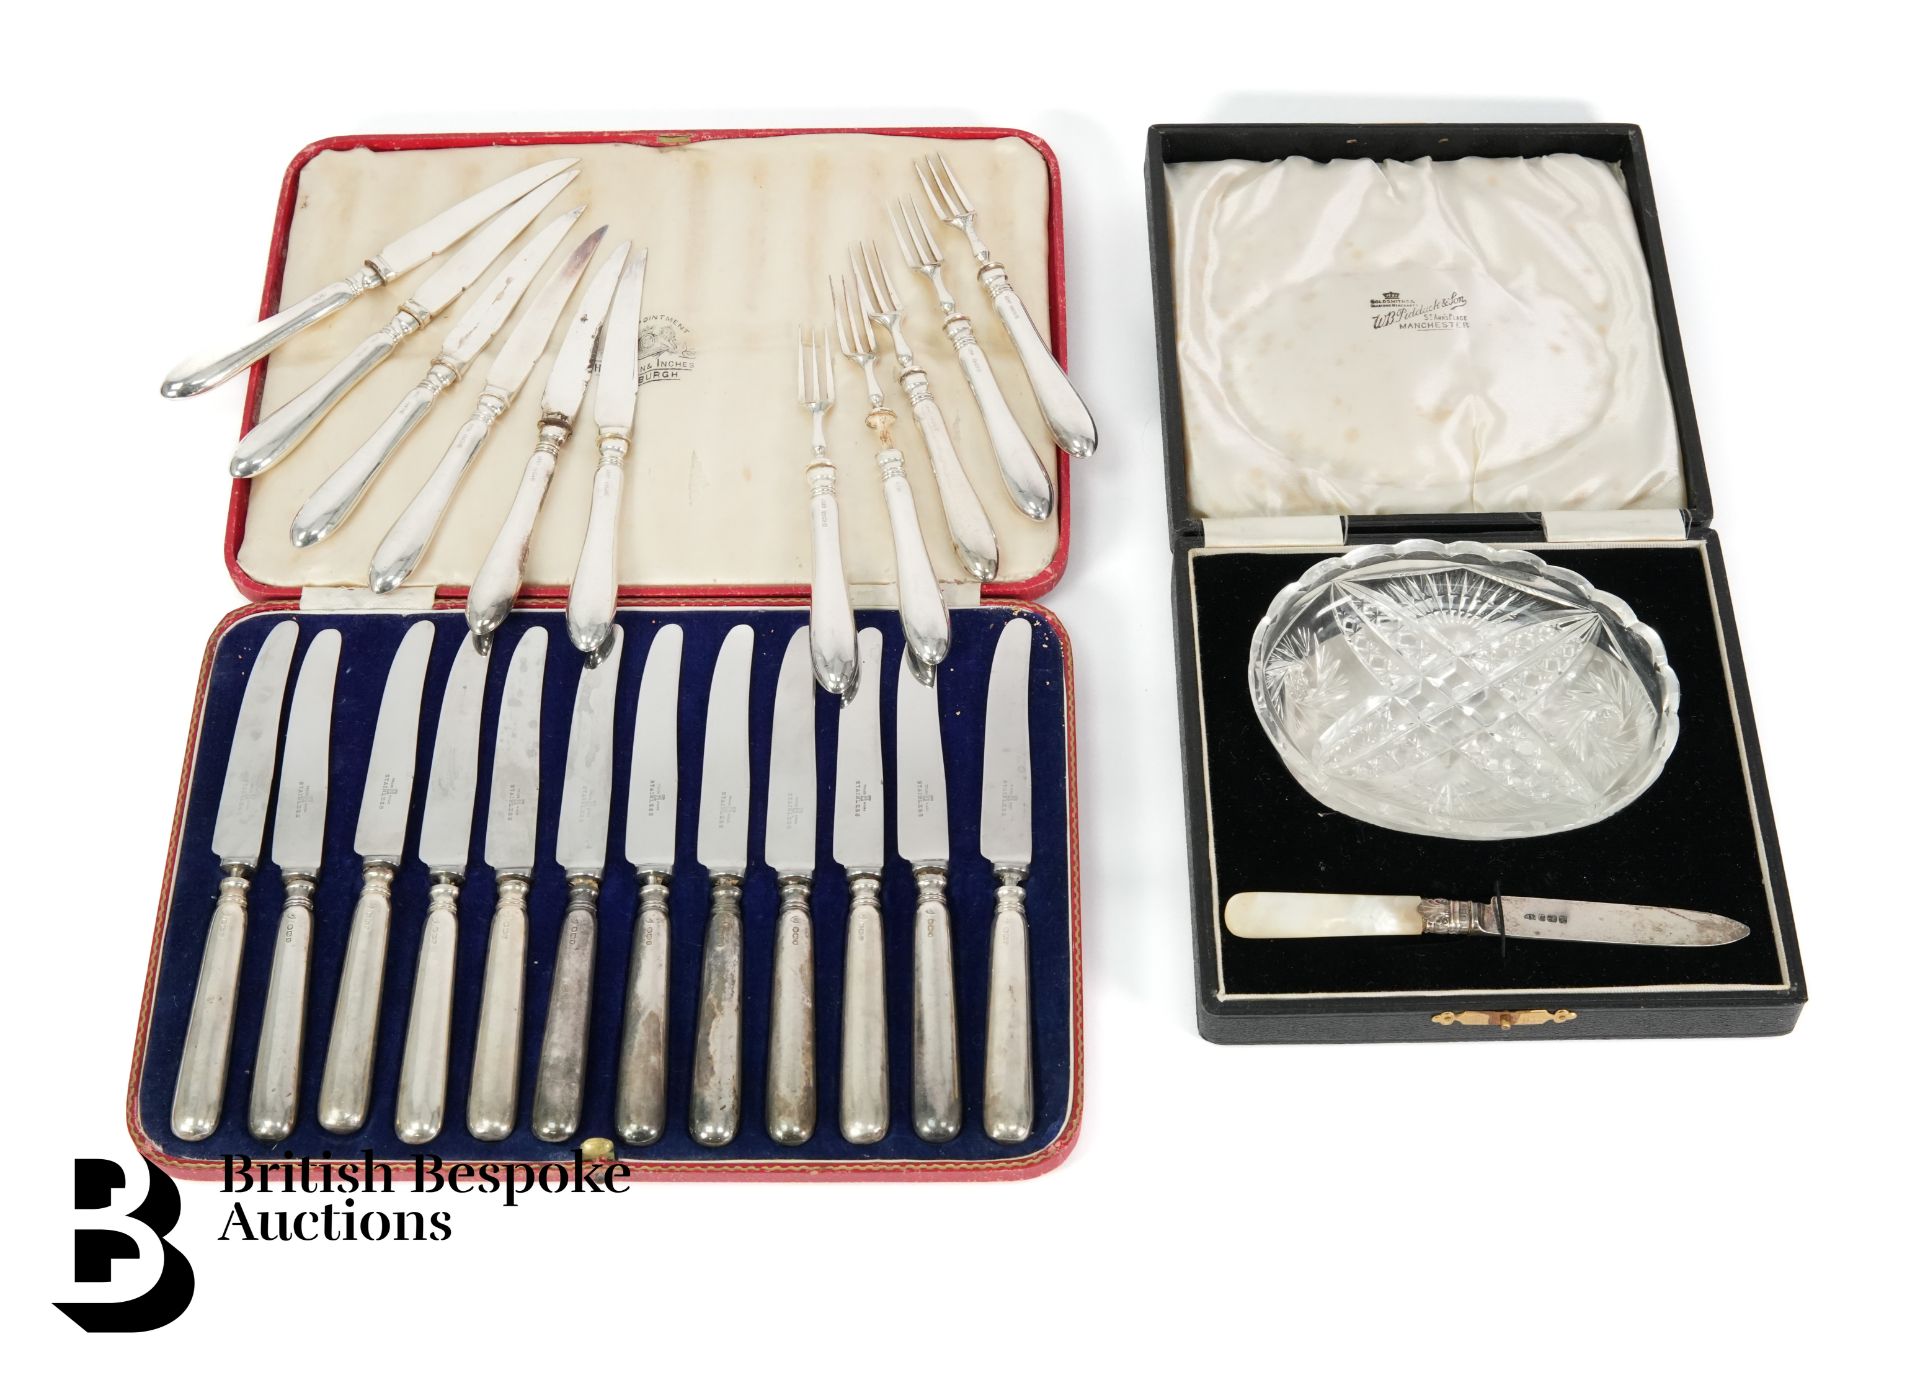 Silver Handled Fruit Knives and Forks